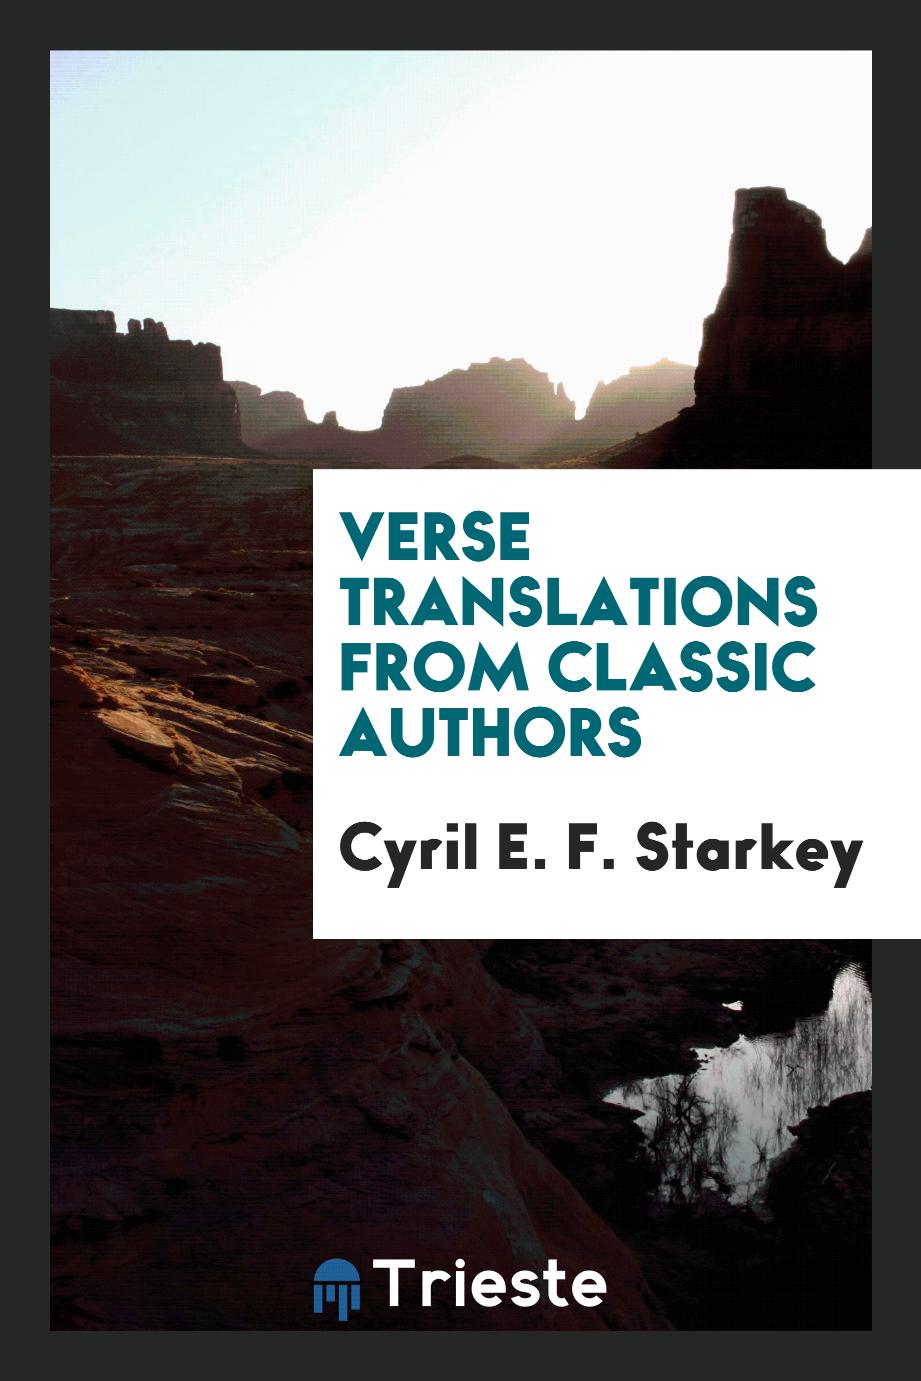 Verse Translations from Classic Authors